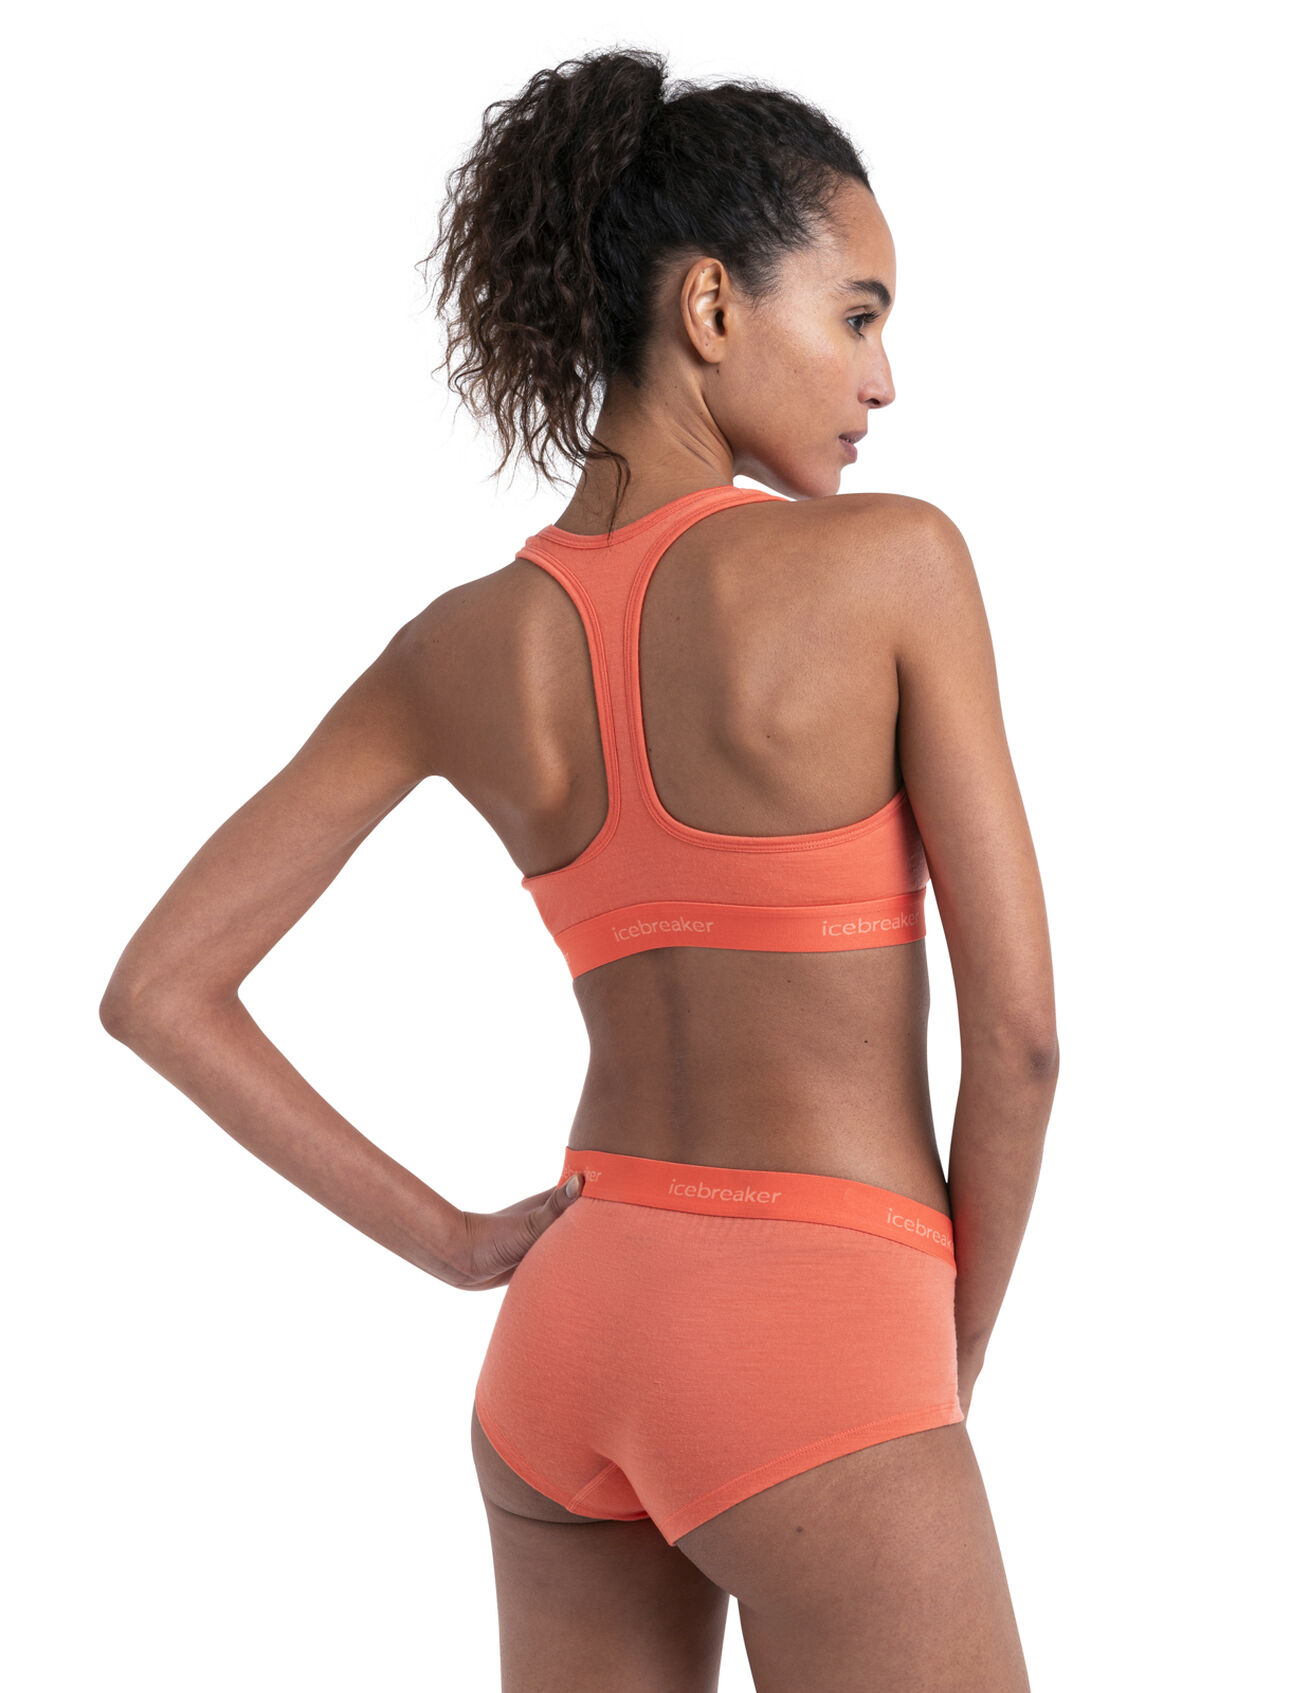 Racerback Bras are Extremely Versatile, so Anyone can Wear Them